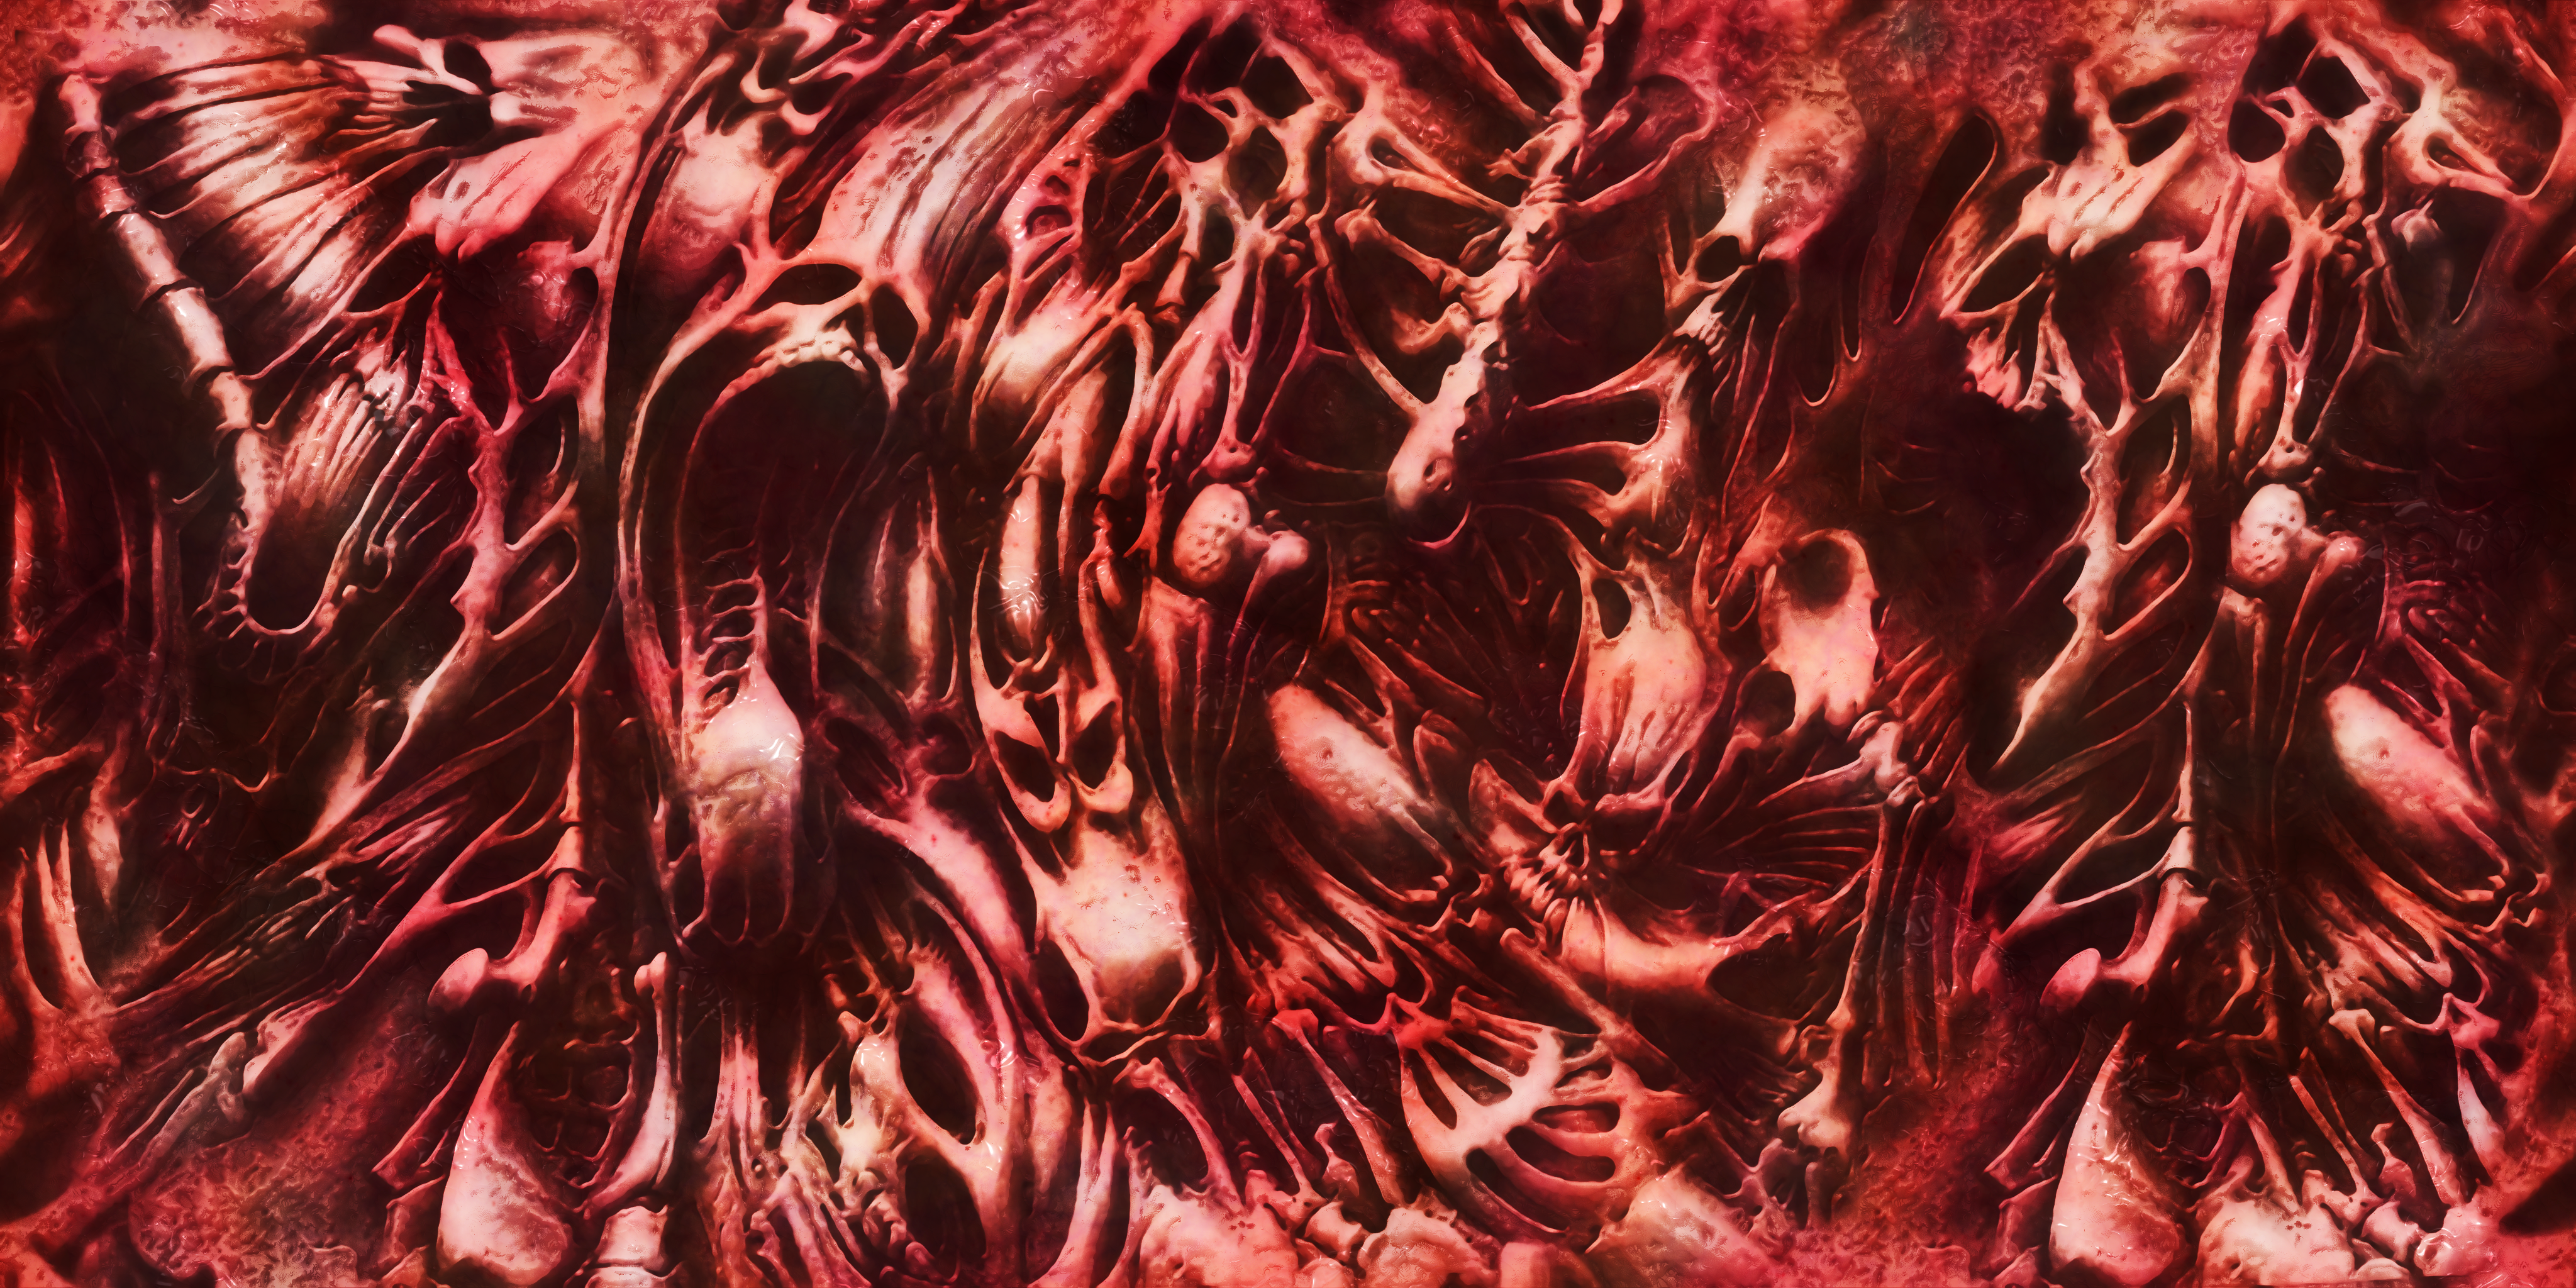 iconic_doom_gore_wall_by_hoover1979-dbx5hqg.png